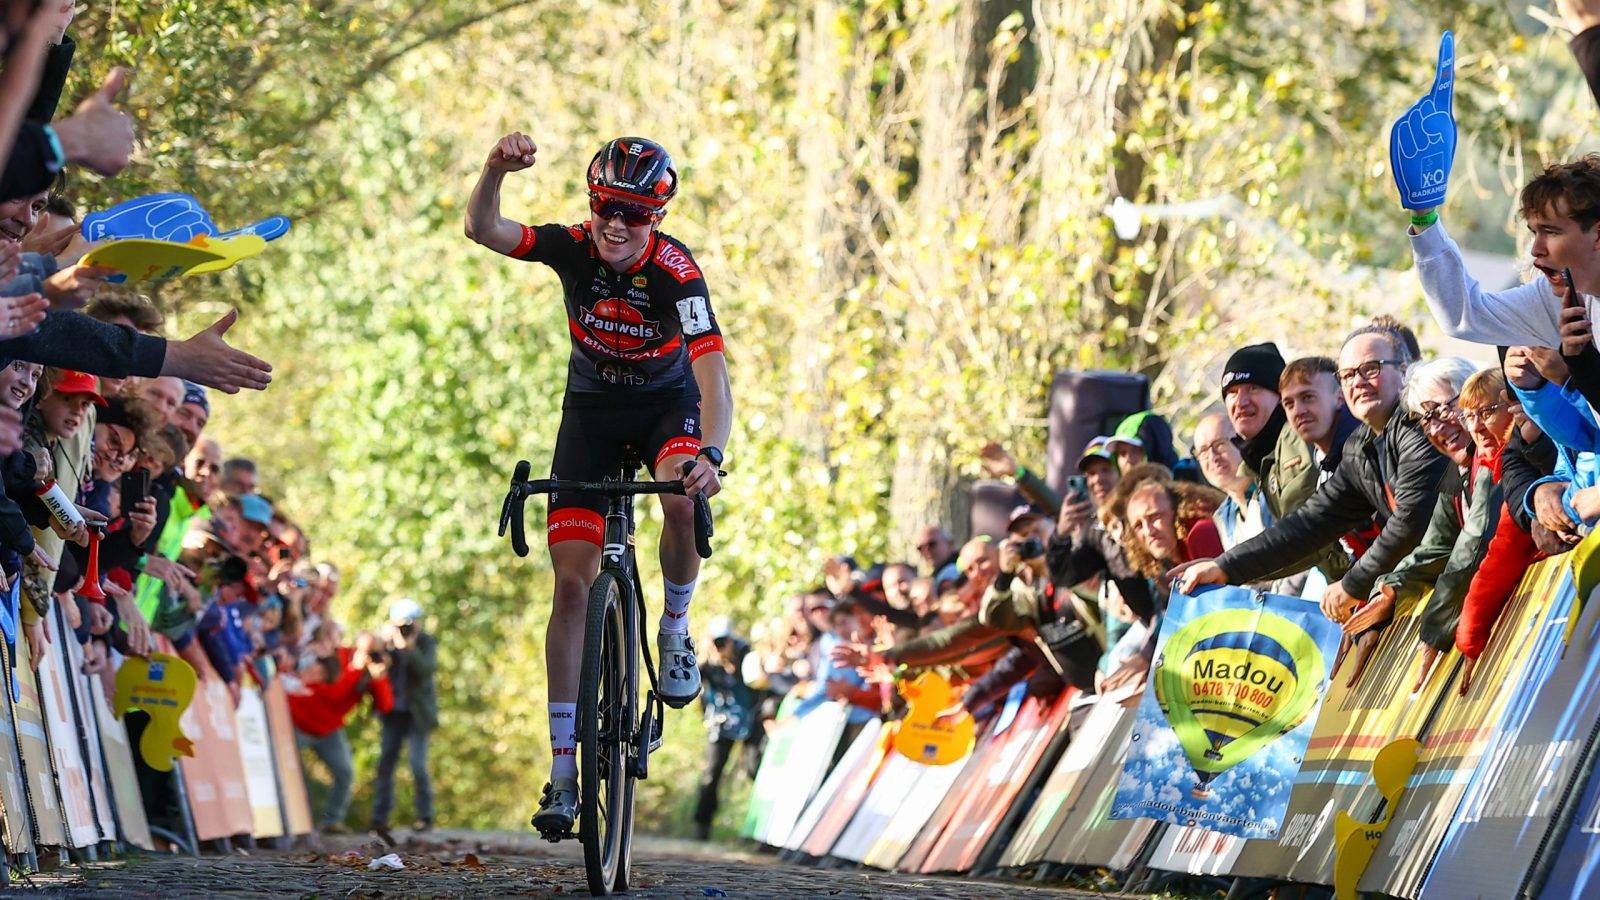 Dutch Fem Van Empel celebrates as she crosses the finish line to win the women's race during the Koppenbergcross, the first race (out of eight) of the X2O Badkamers trophy, in Melden, on Tuesday 01 November 2022. BELGA PHOTO DAVID PINTENS